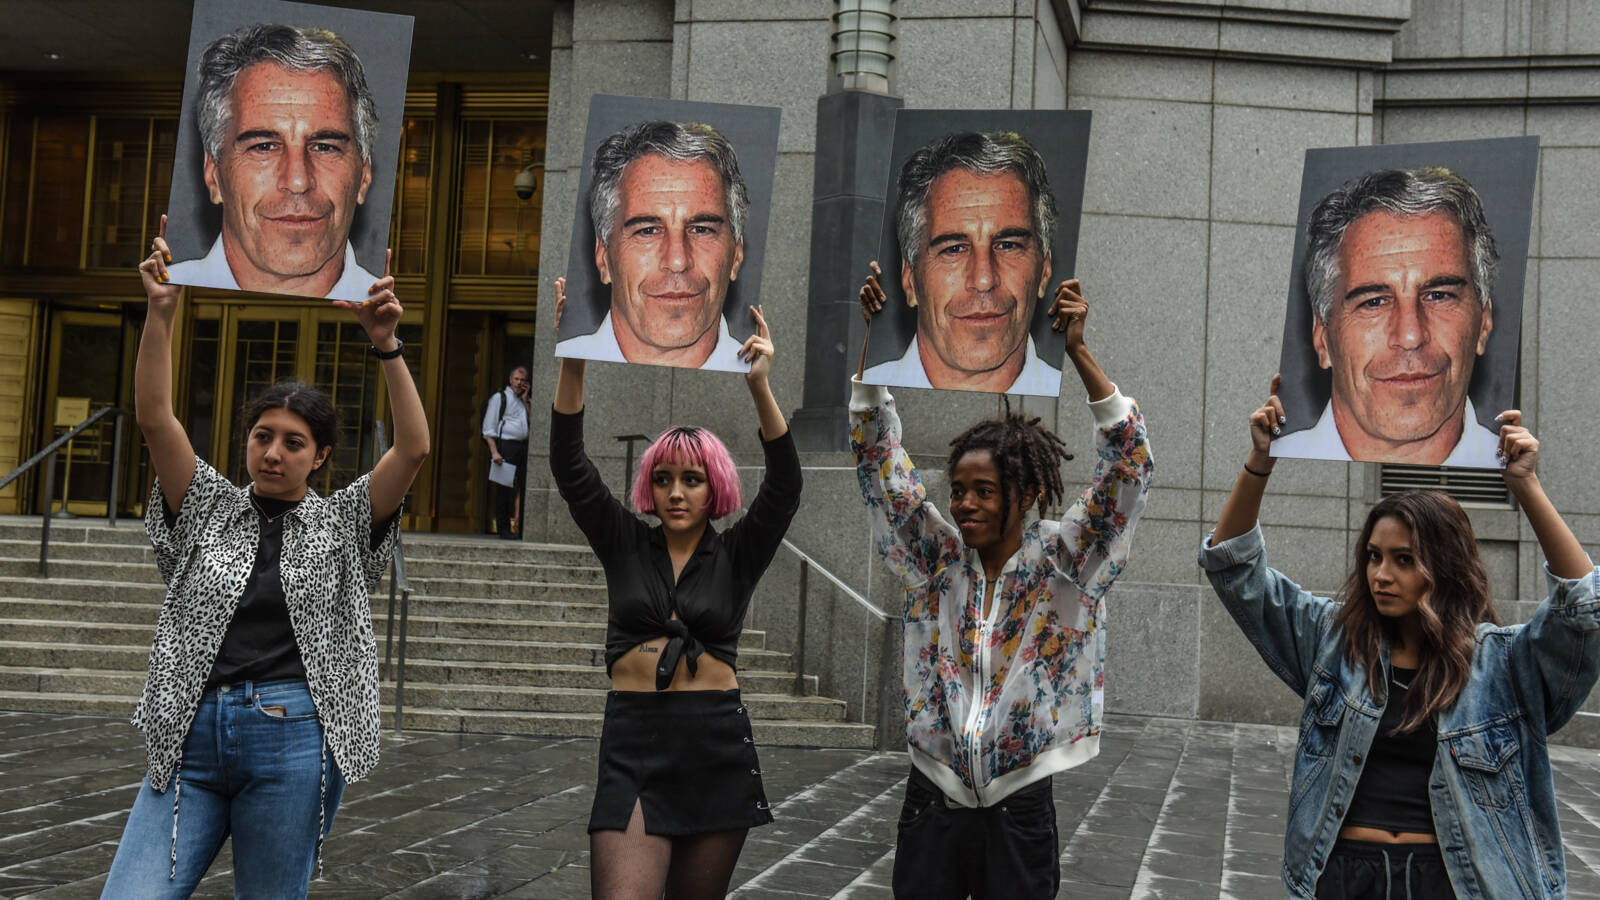 Protest against Epstein at courthouse, AFP video